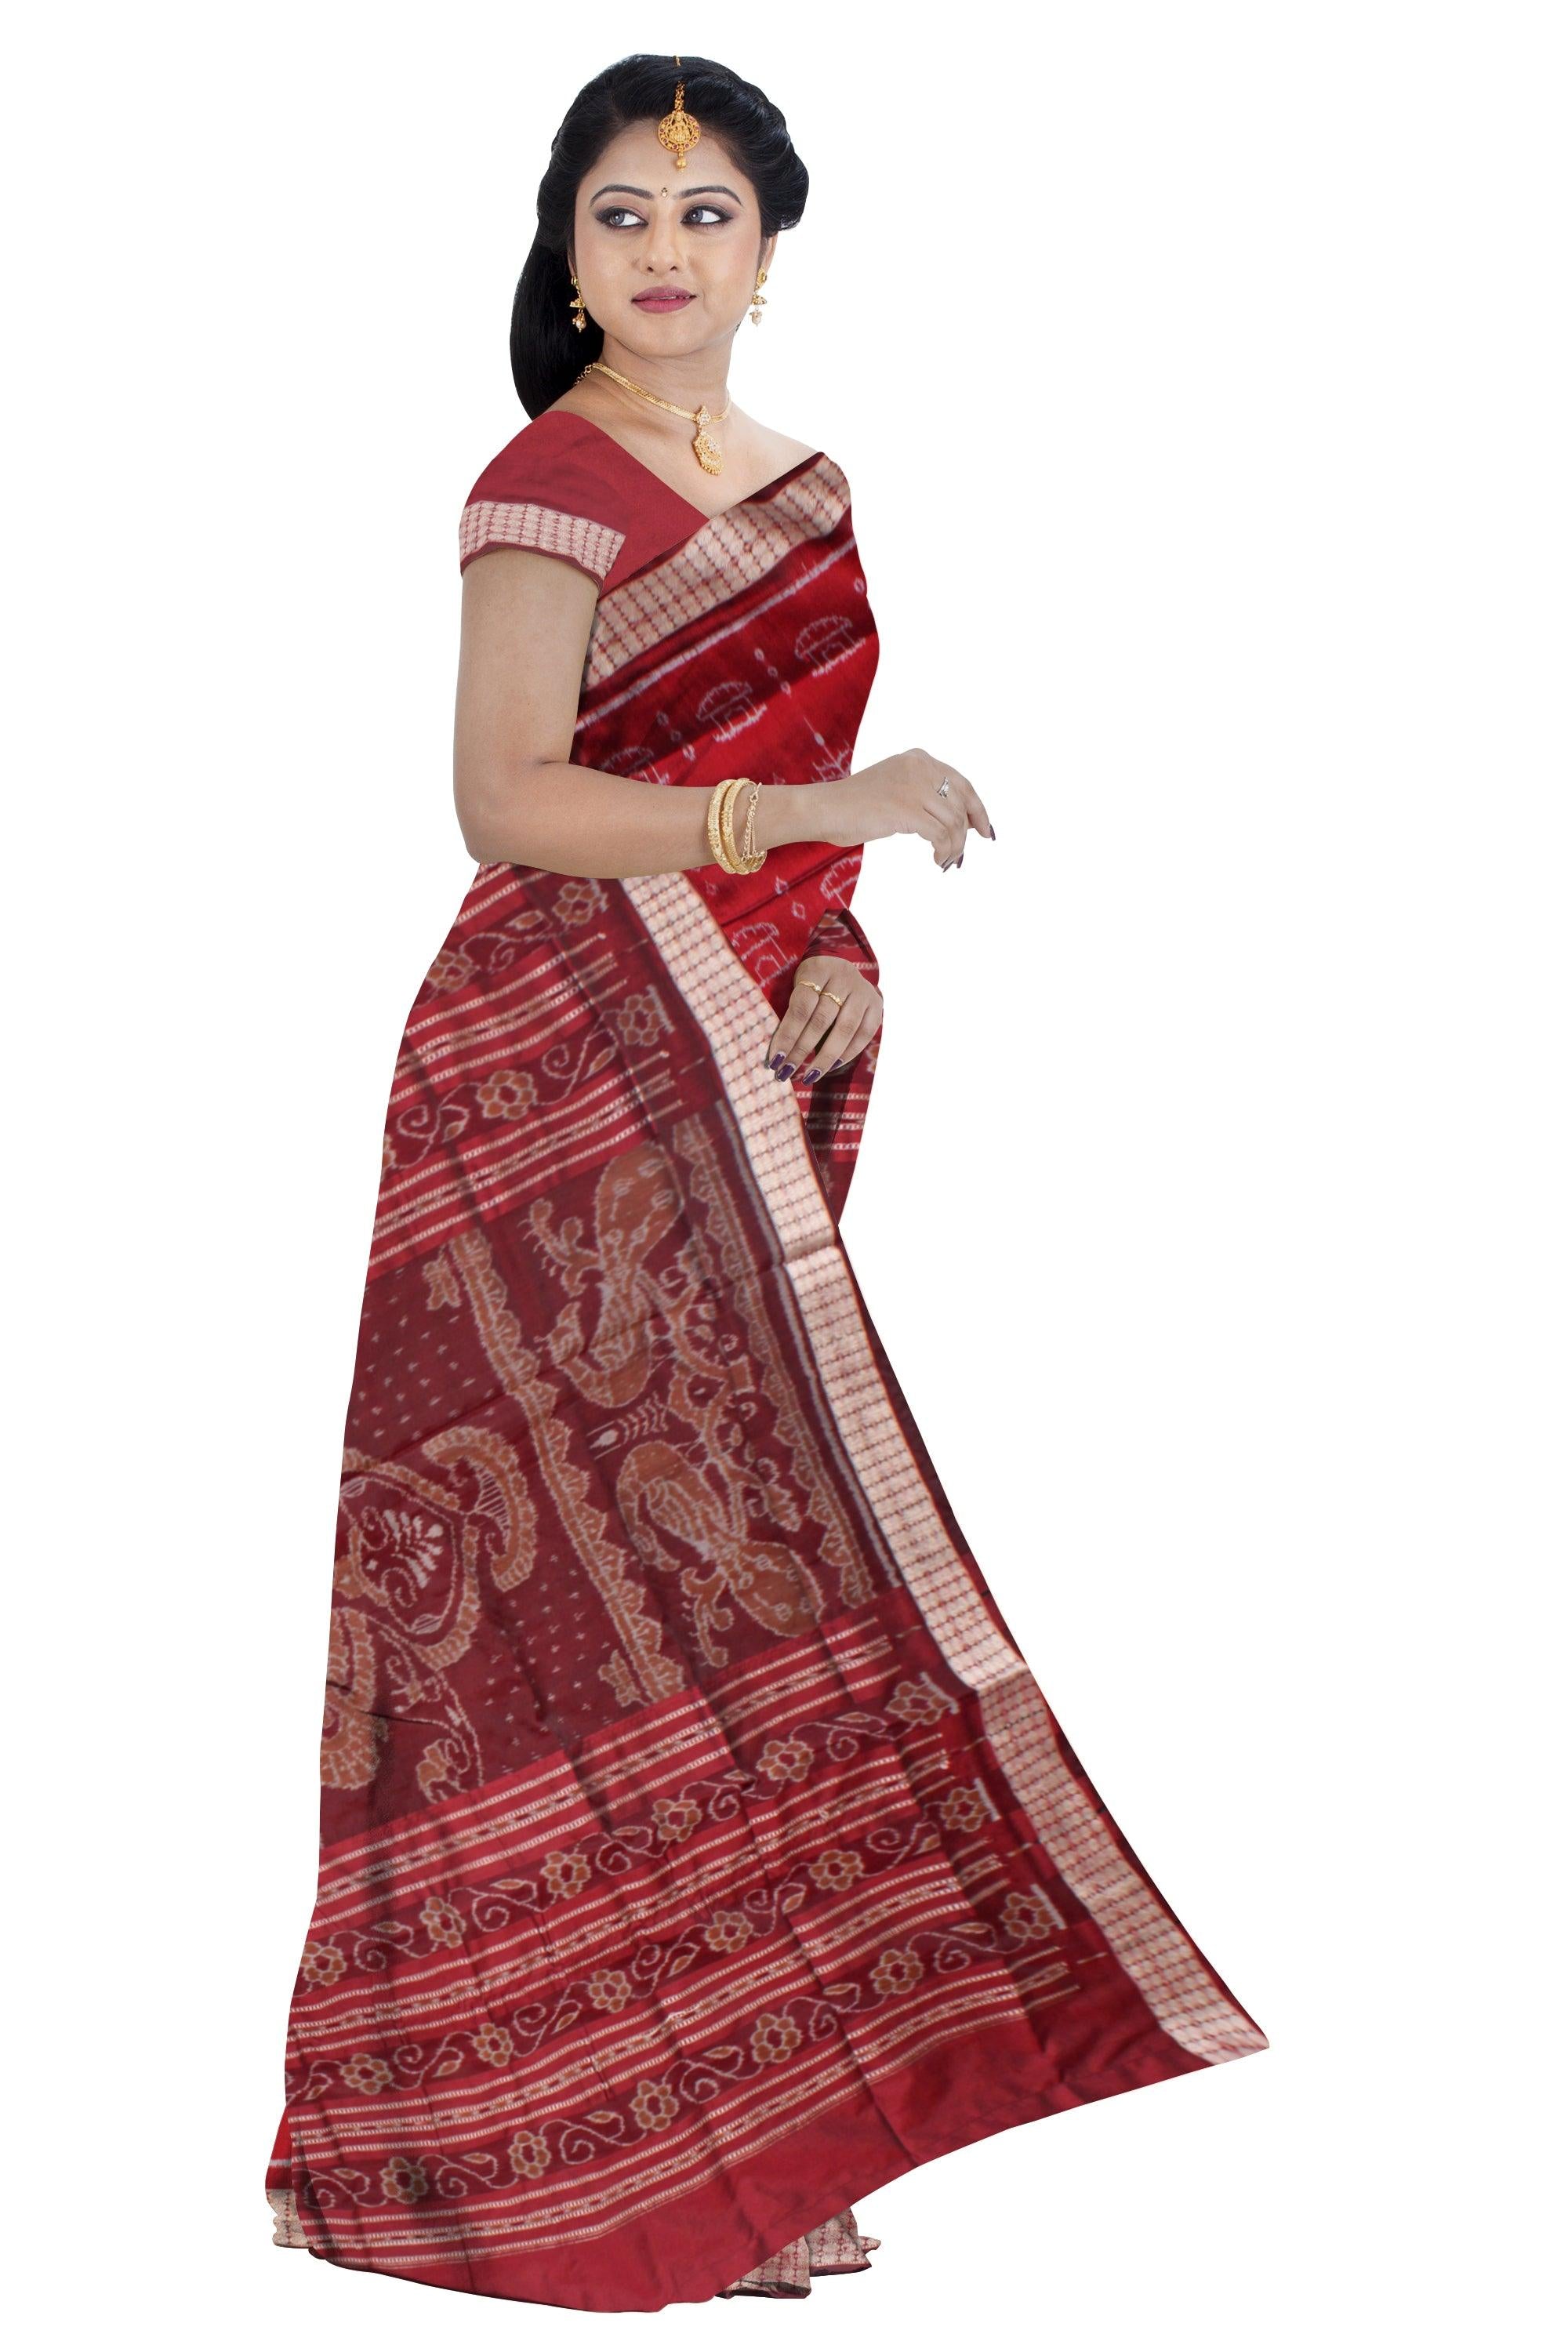 SMALL HOUSE AND TREE PATTERN PATA SAREE IS  MAROON AND COFFEE COLRO BASE, WITH MATCHING BLOUSE PIECE. - Koshali Arts & Crafts Enterprise